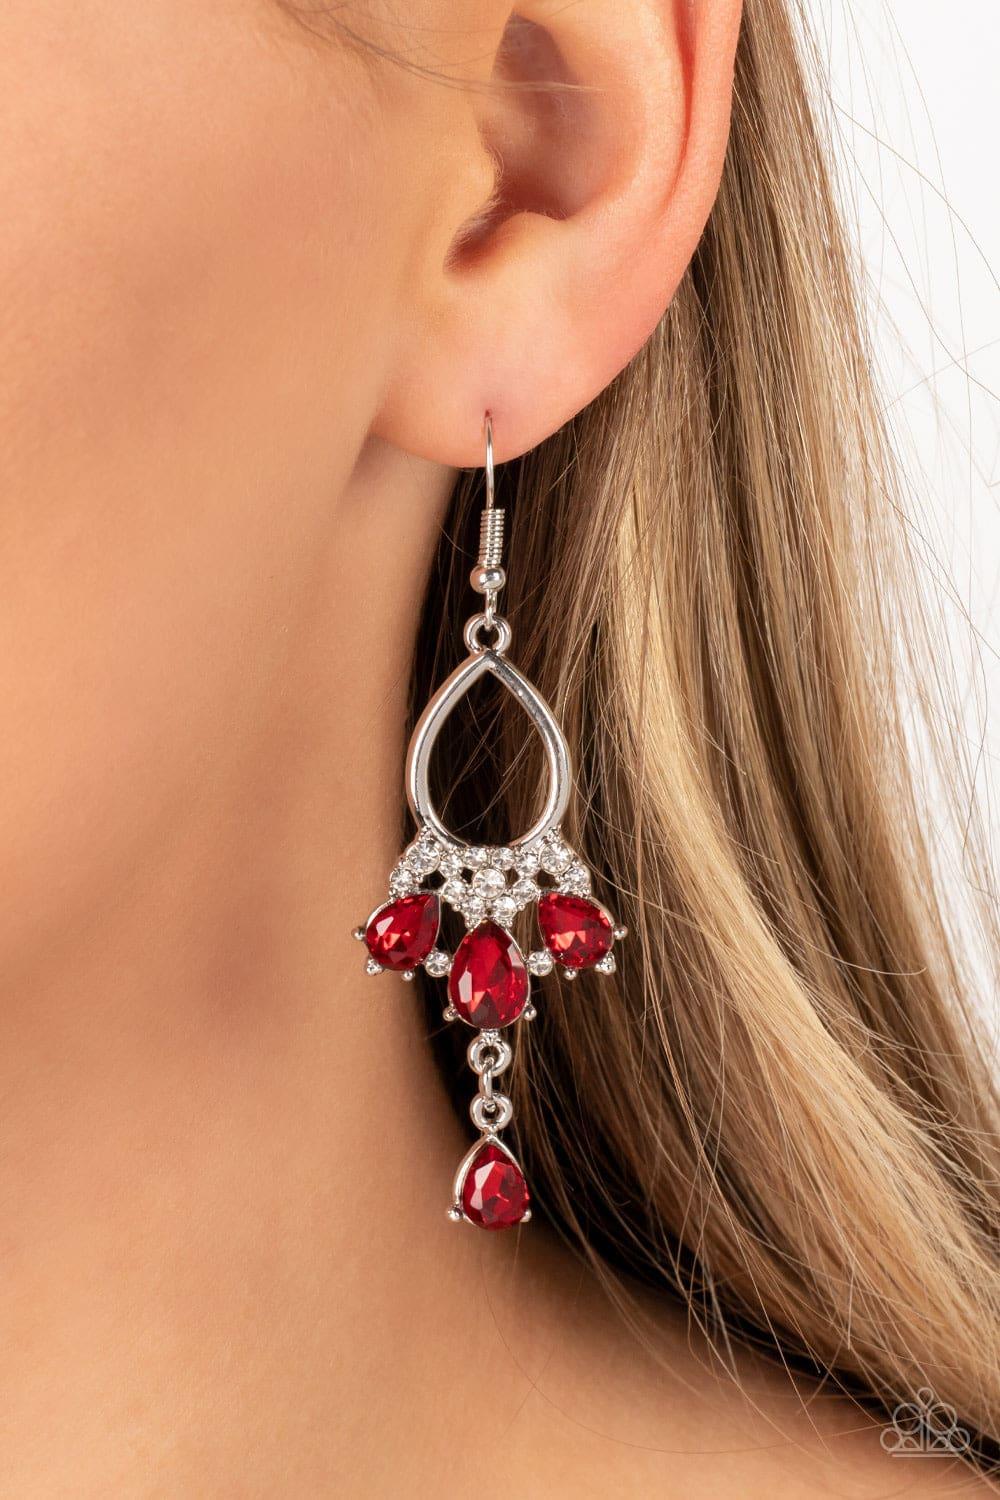 Paparazzi Accessories - Coming In Clutch - Red Earrings - Bling by JessieK